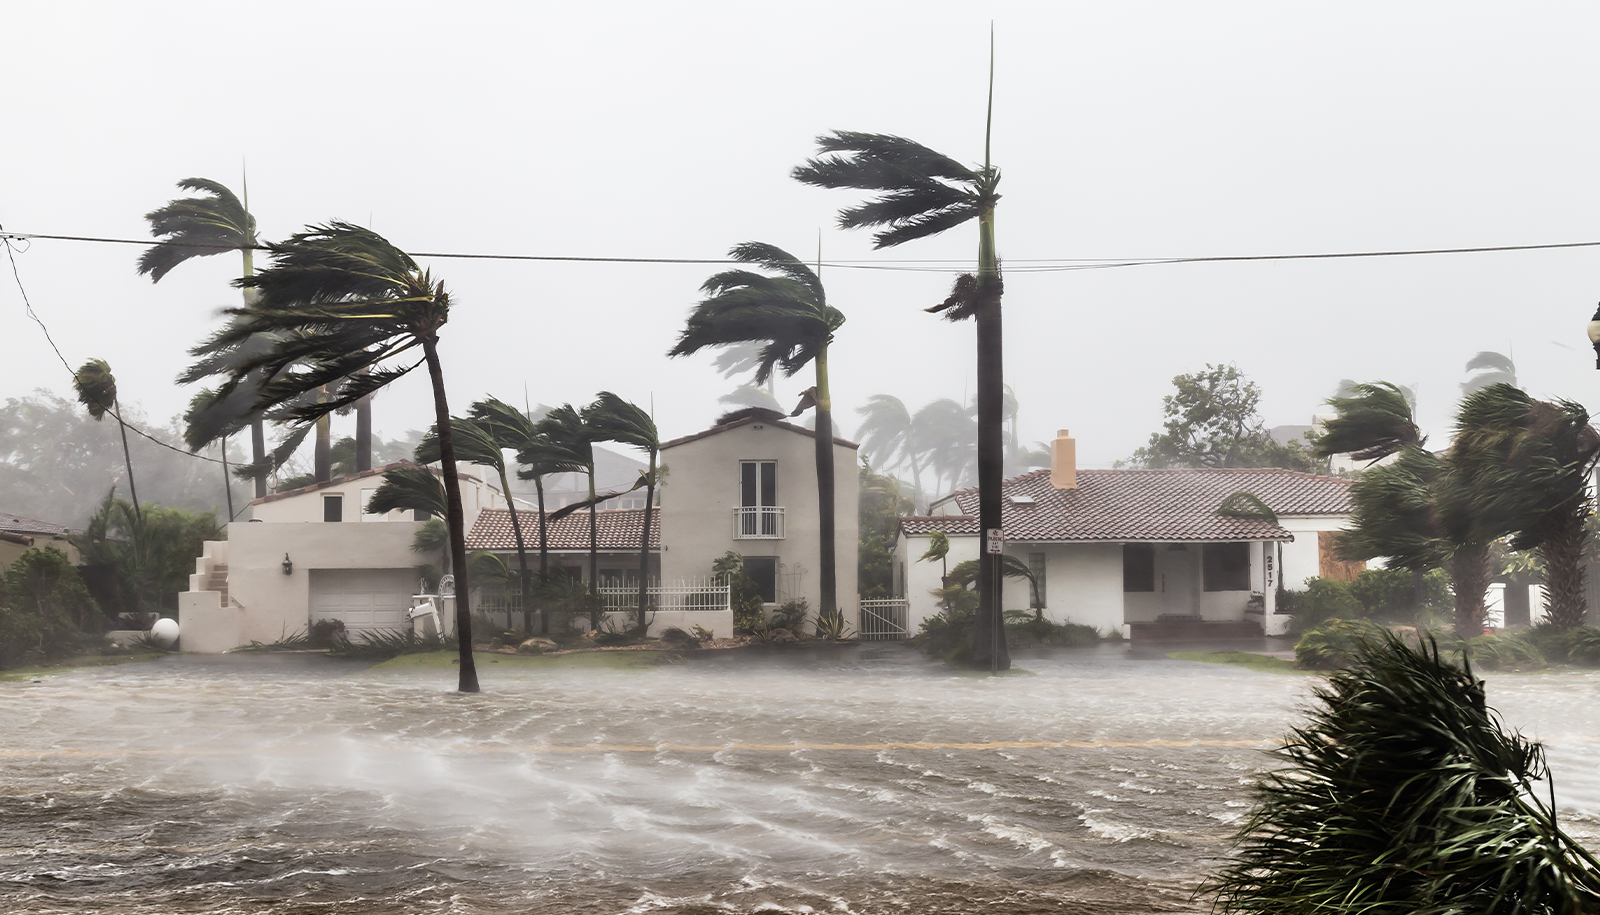 Top 4 Questions About Hurricanes in Florida